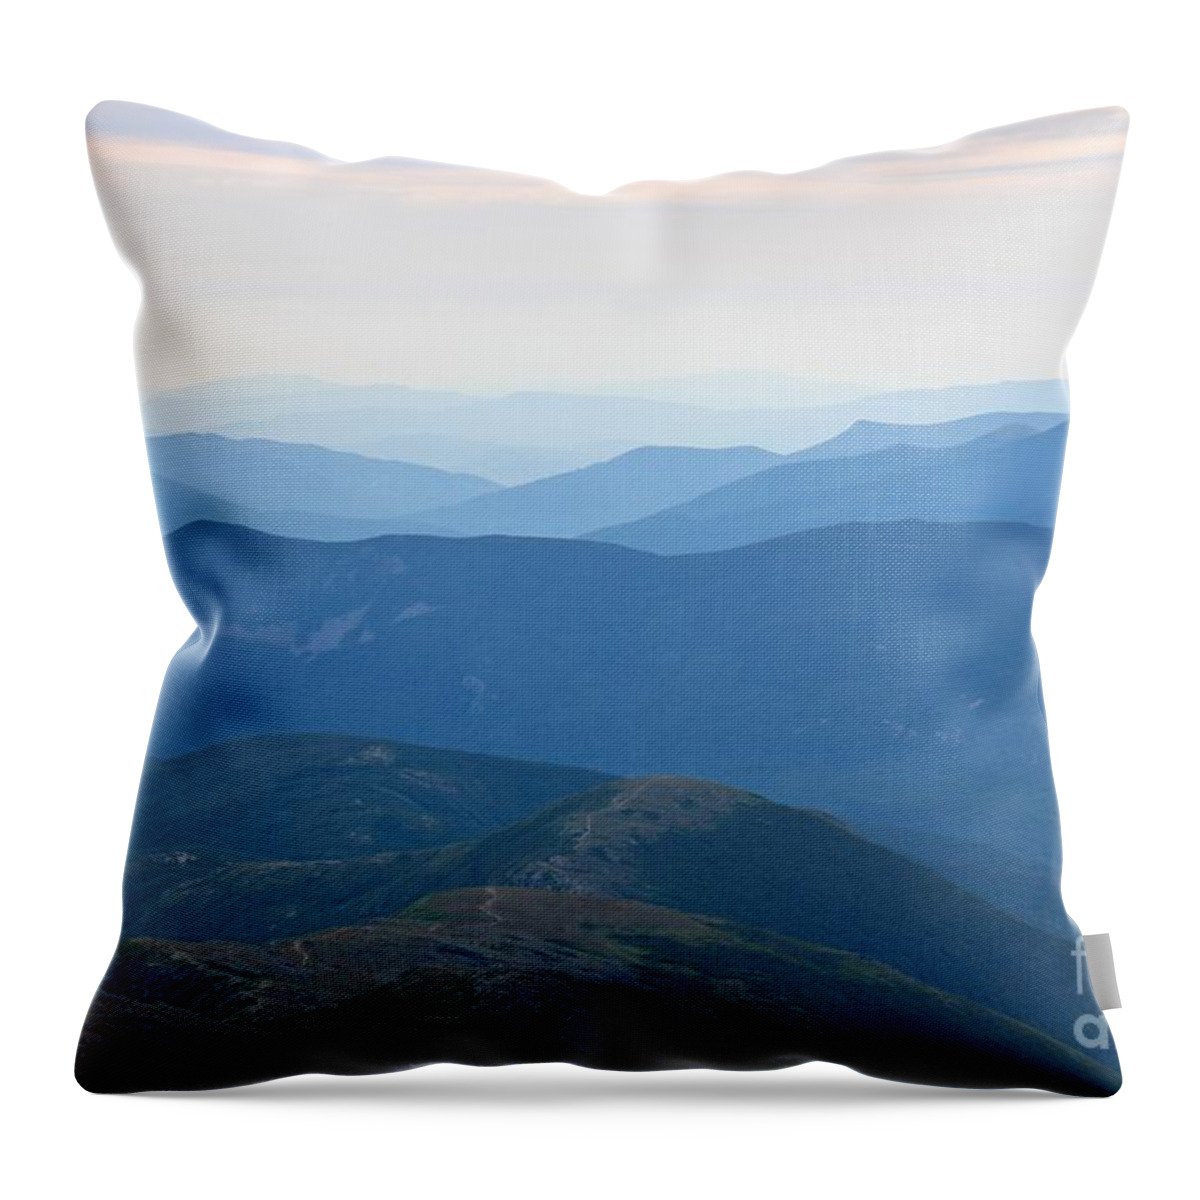 Mt. Washington Throw Pillow featuring the photograph Mt. Washington #5 by Deena Withycombe